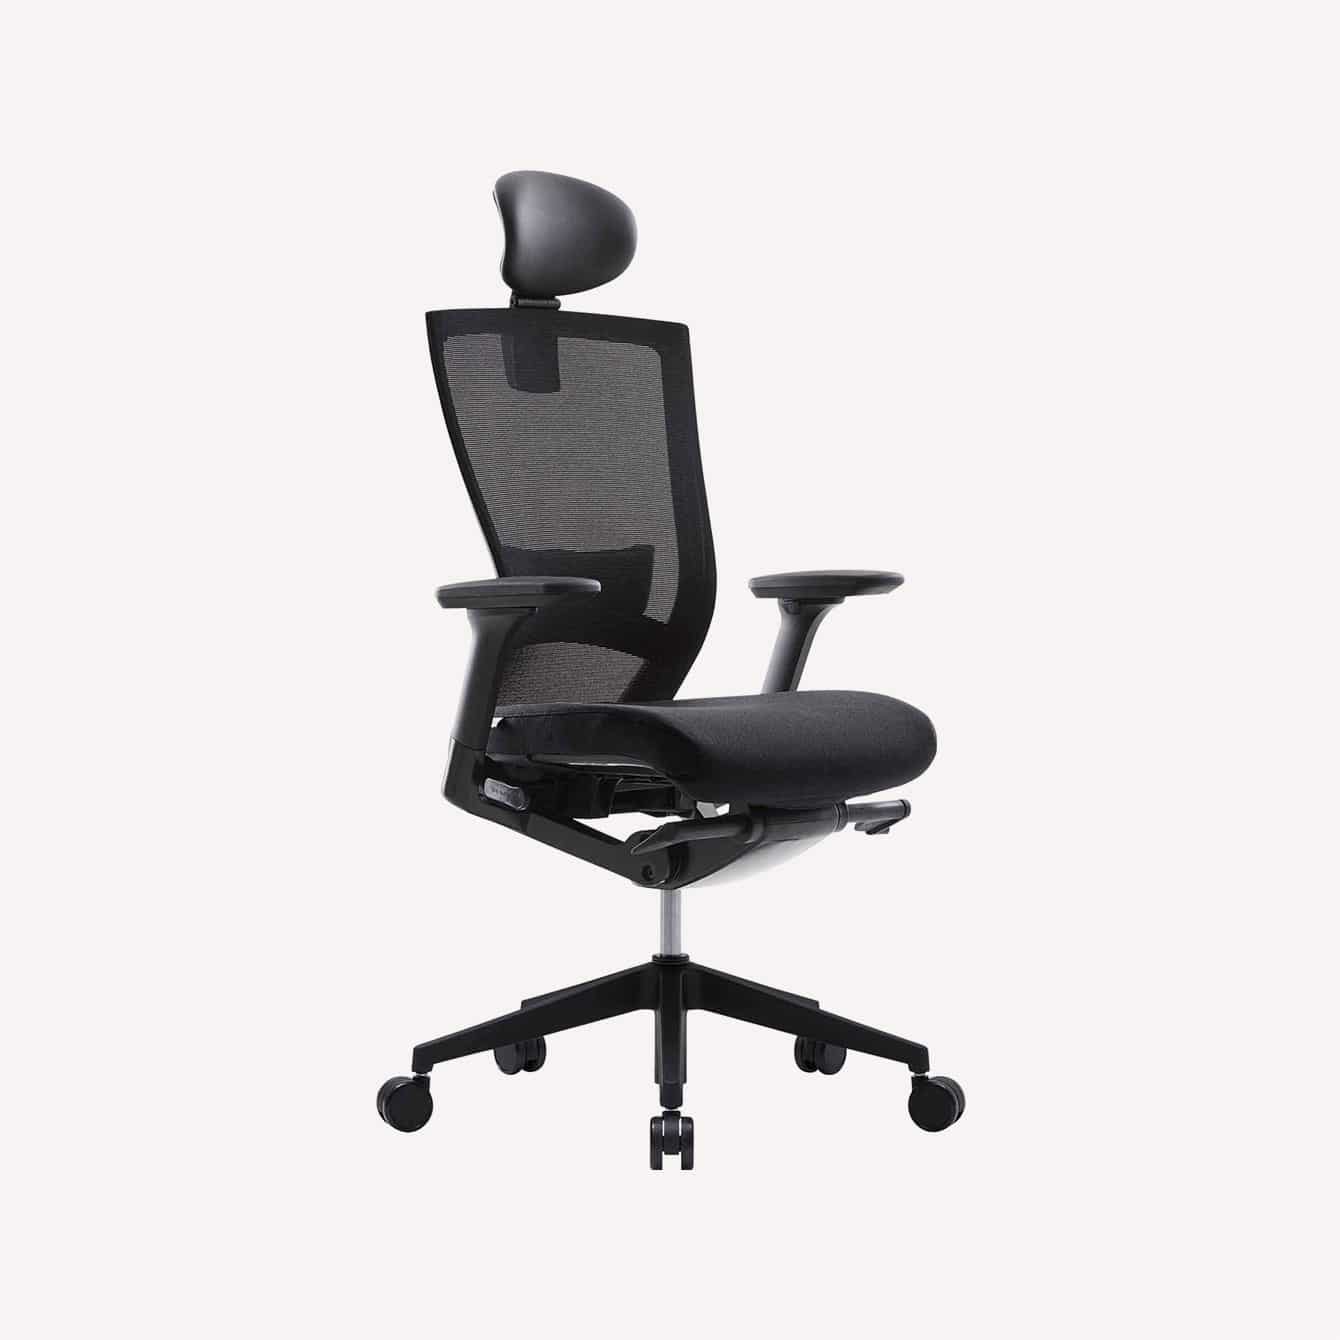 What's the Best Chair for SHORT PEOPLE? Pt. 1 (5'7 or 170cm and